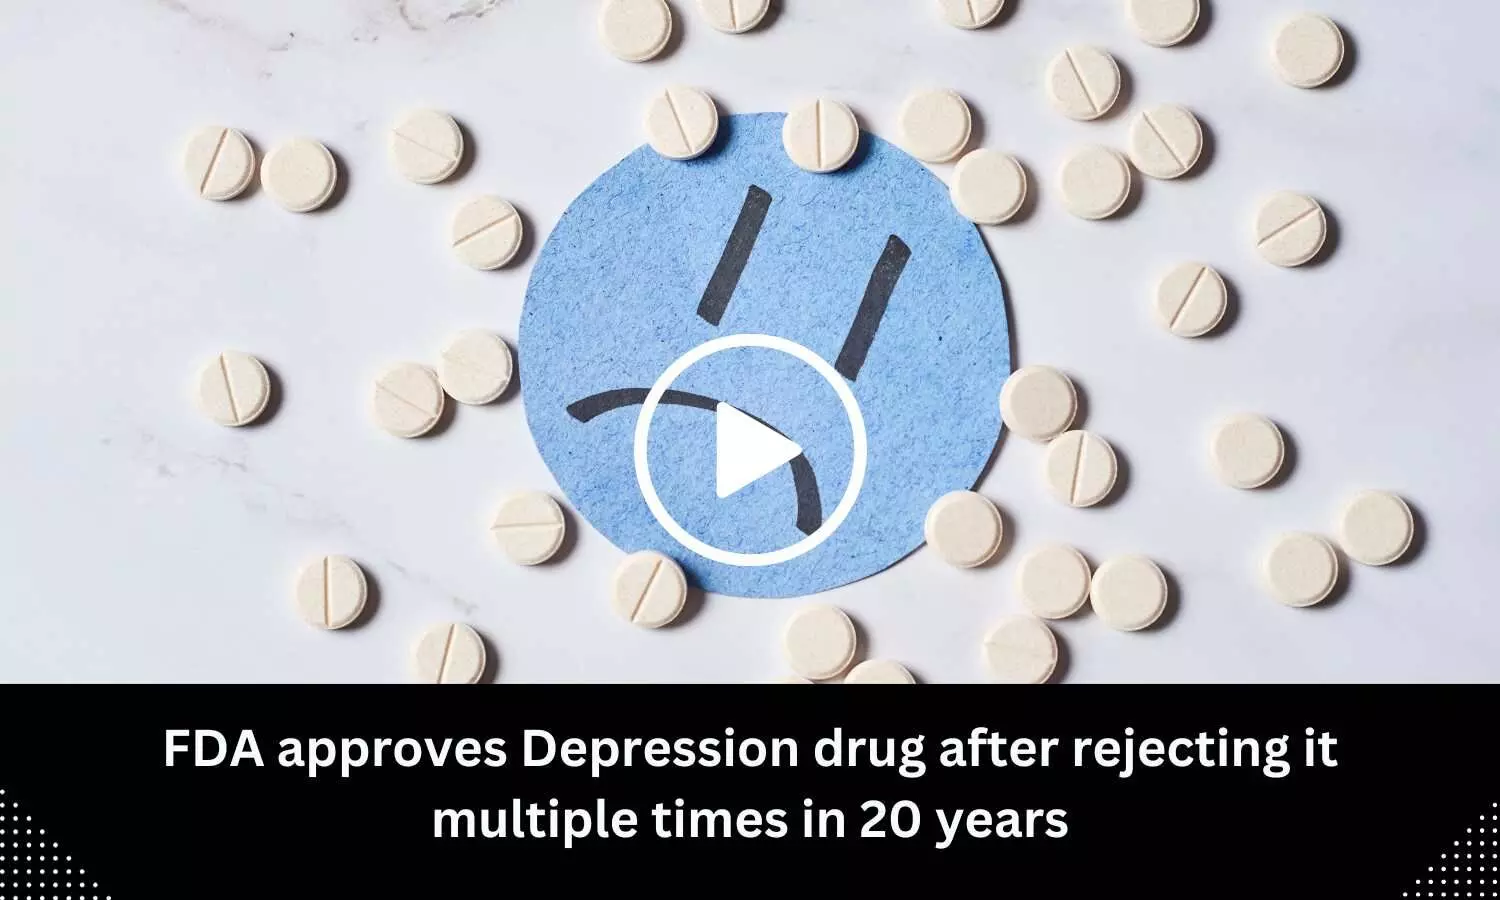 FDA approves Depression drug after rejecting it multiple times in 20 years